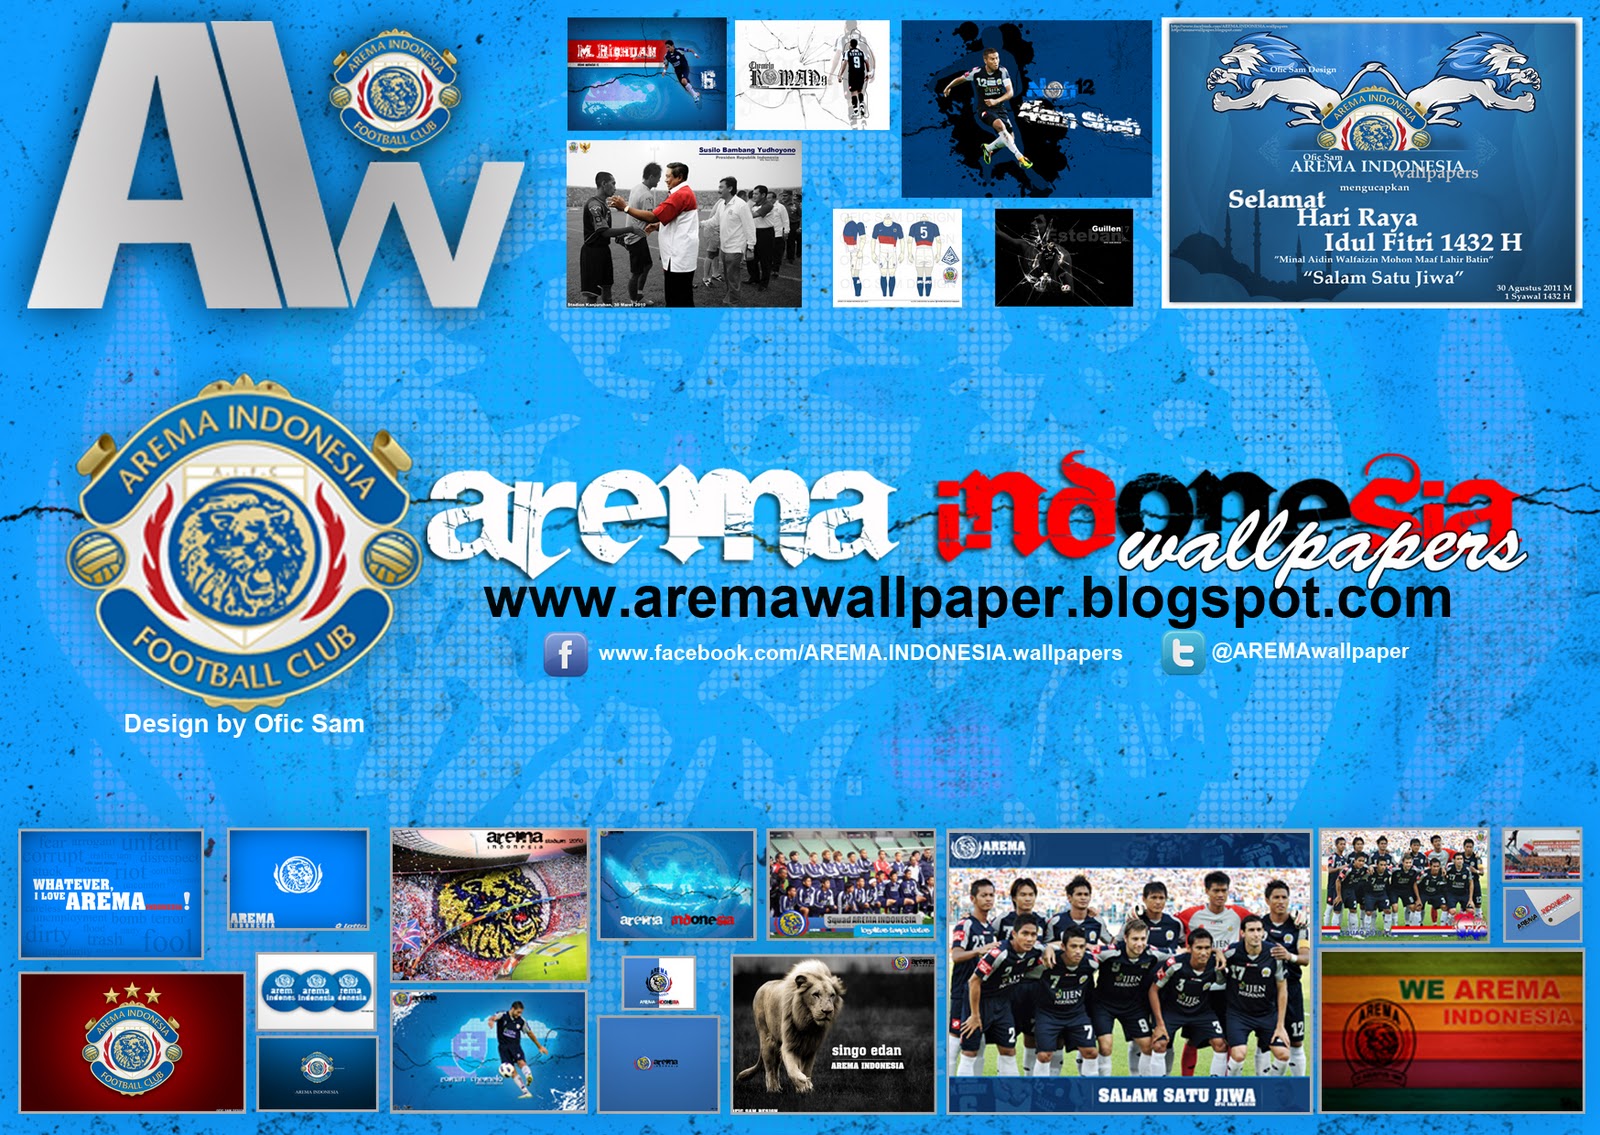 wallpaper aremania,technology,games,world,advertising,fictional character